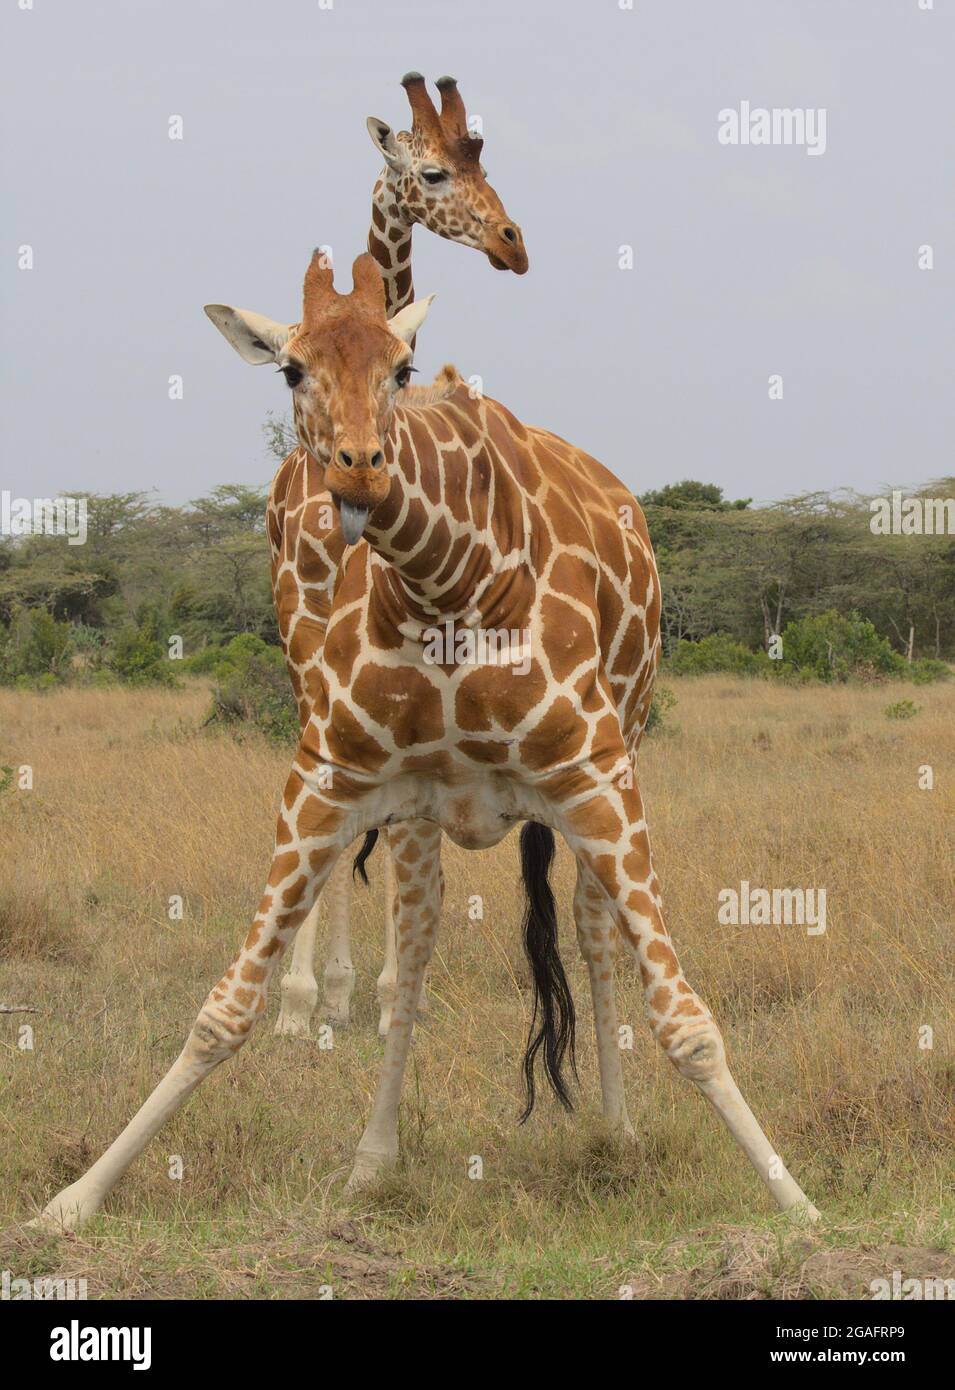 a reticulated giraffe looks up after taking a drink of water with tongue sticking out cheekily while another stand guards behind it in the wild, Kenya Stock Photo